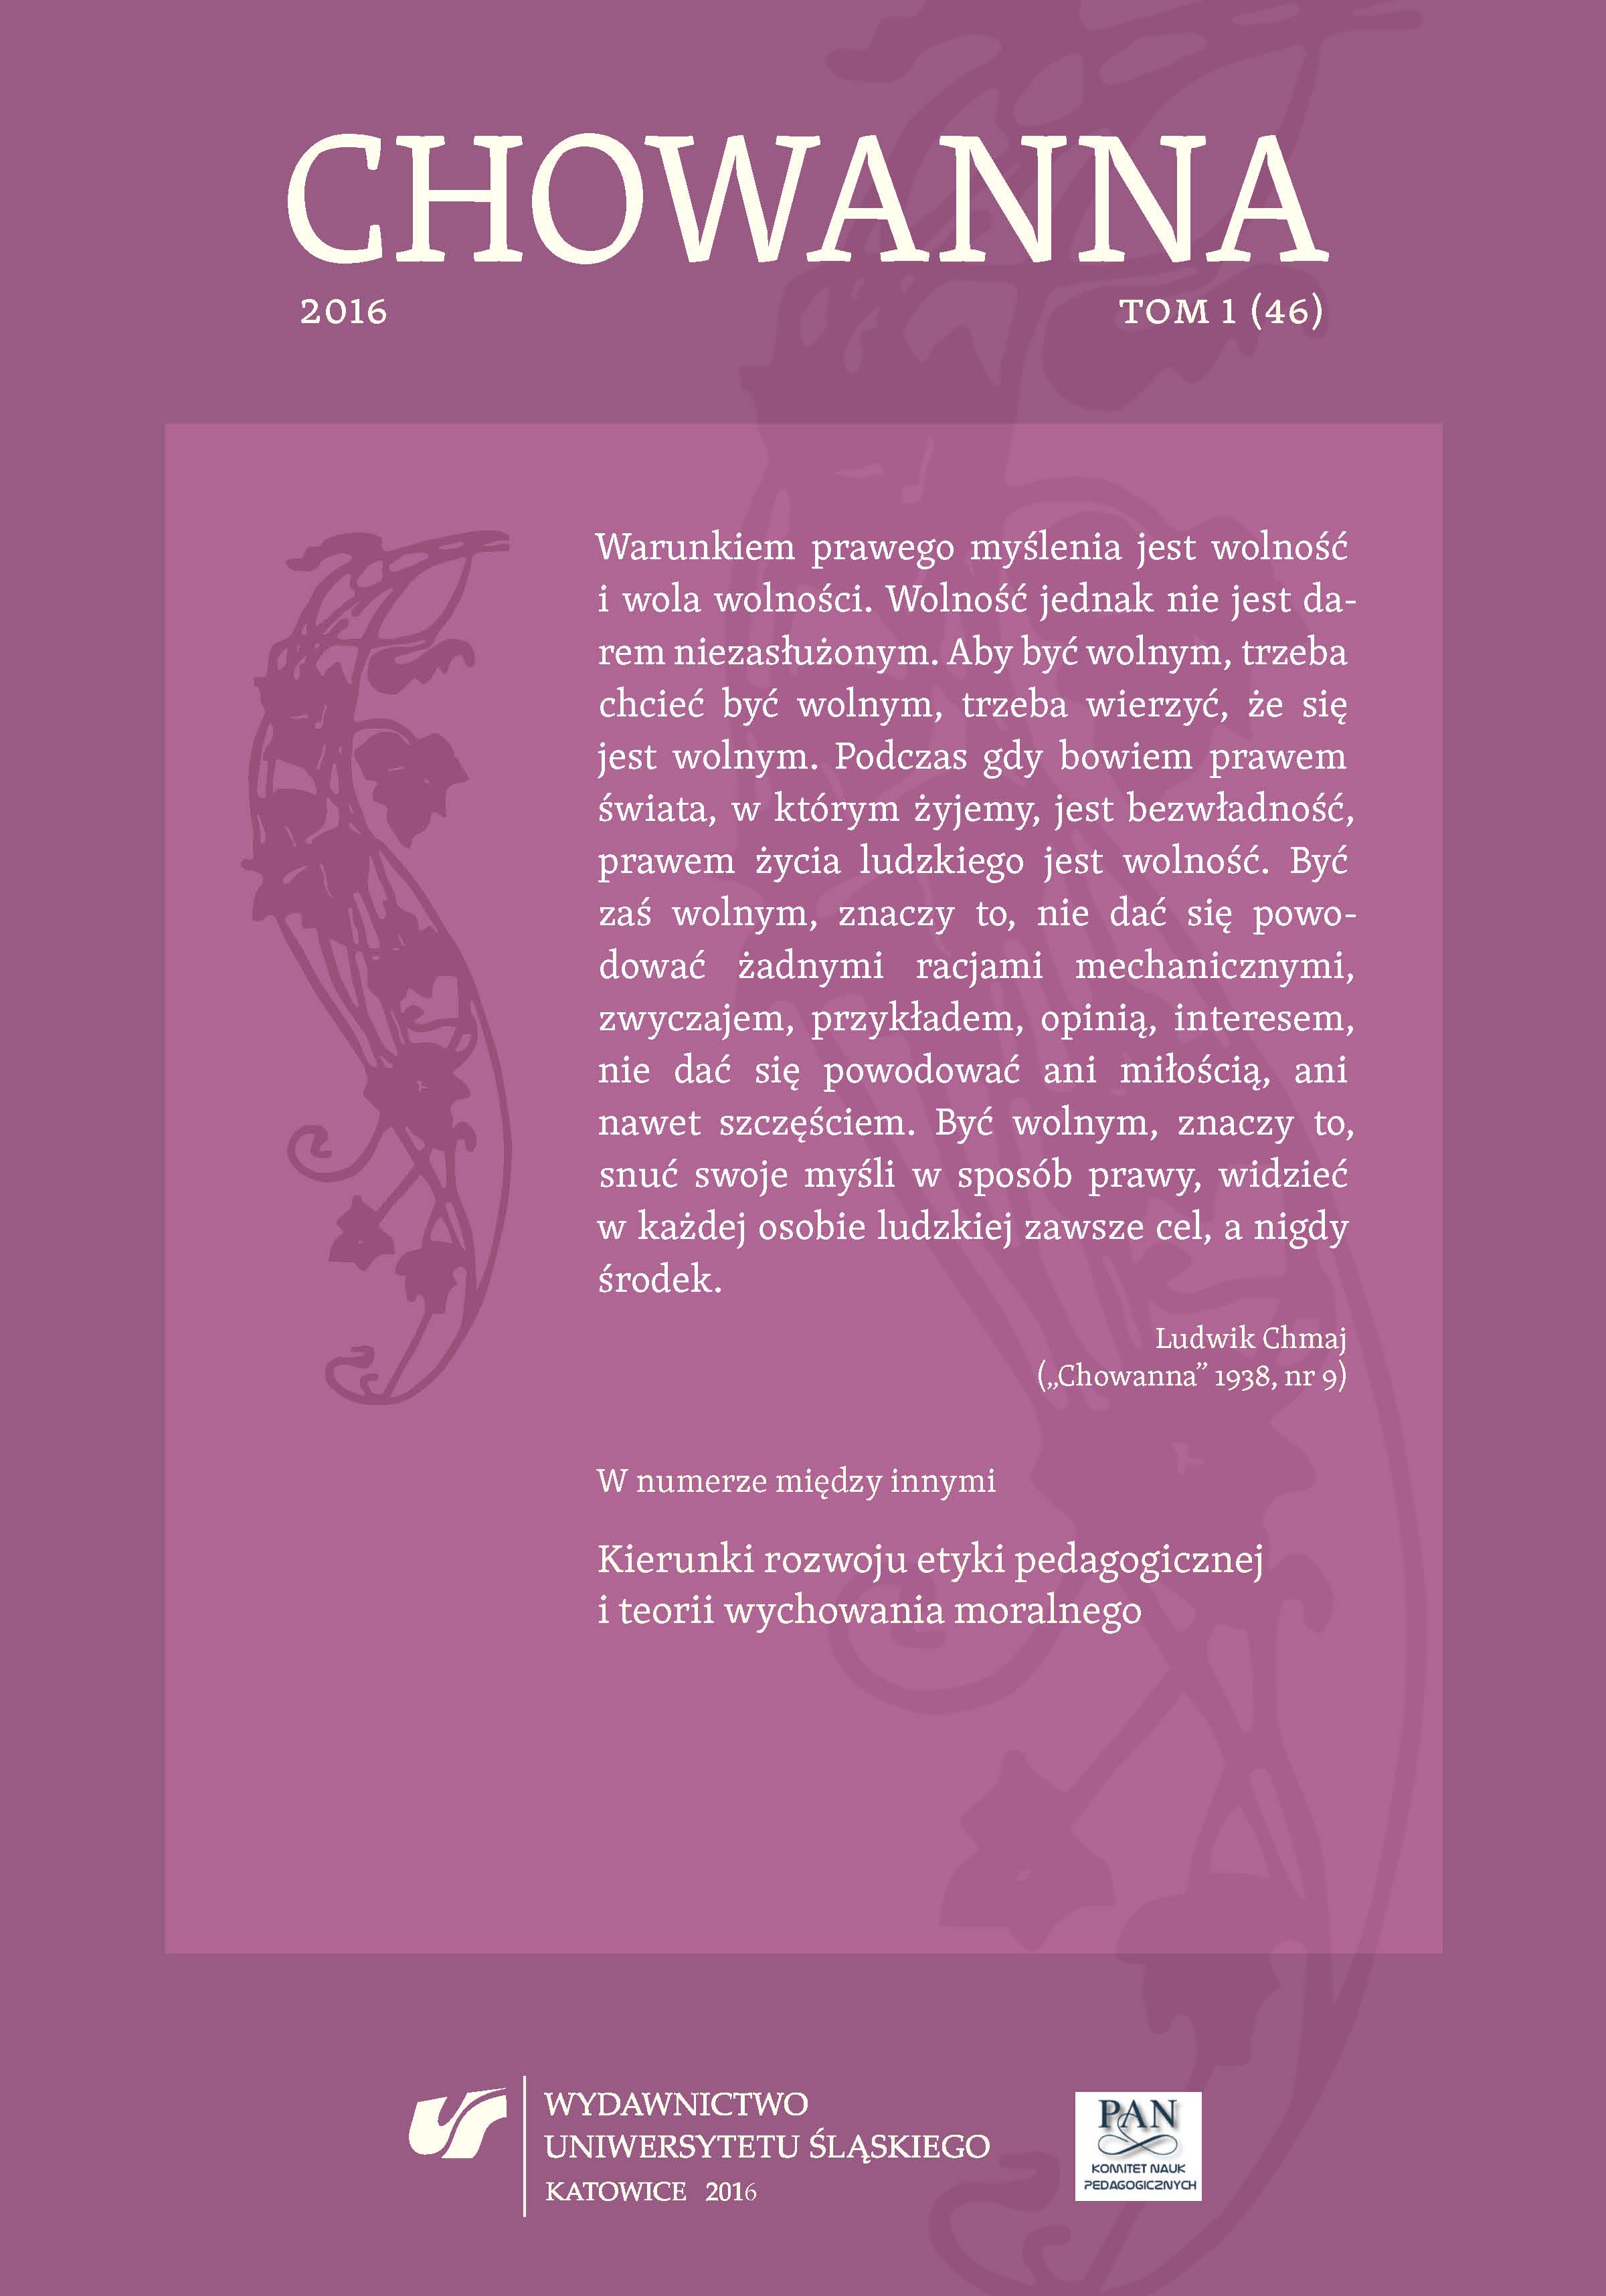 Monographic Part. Developmental Directions of Pedagogical Ethic and Theory of Moral Education (edited by Alicja Żywczok): Moral and Educational Consequences of Ethical Intellectualism Cover Image